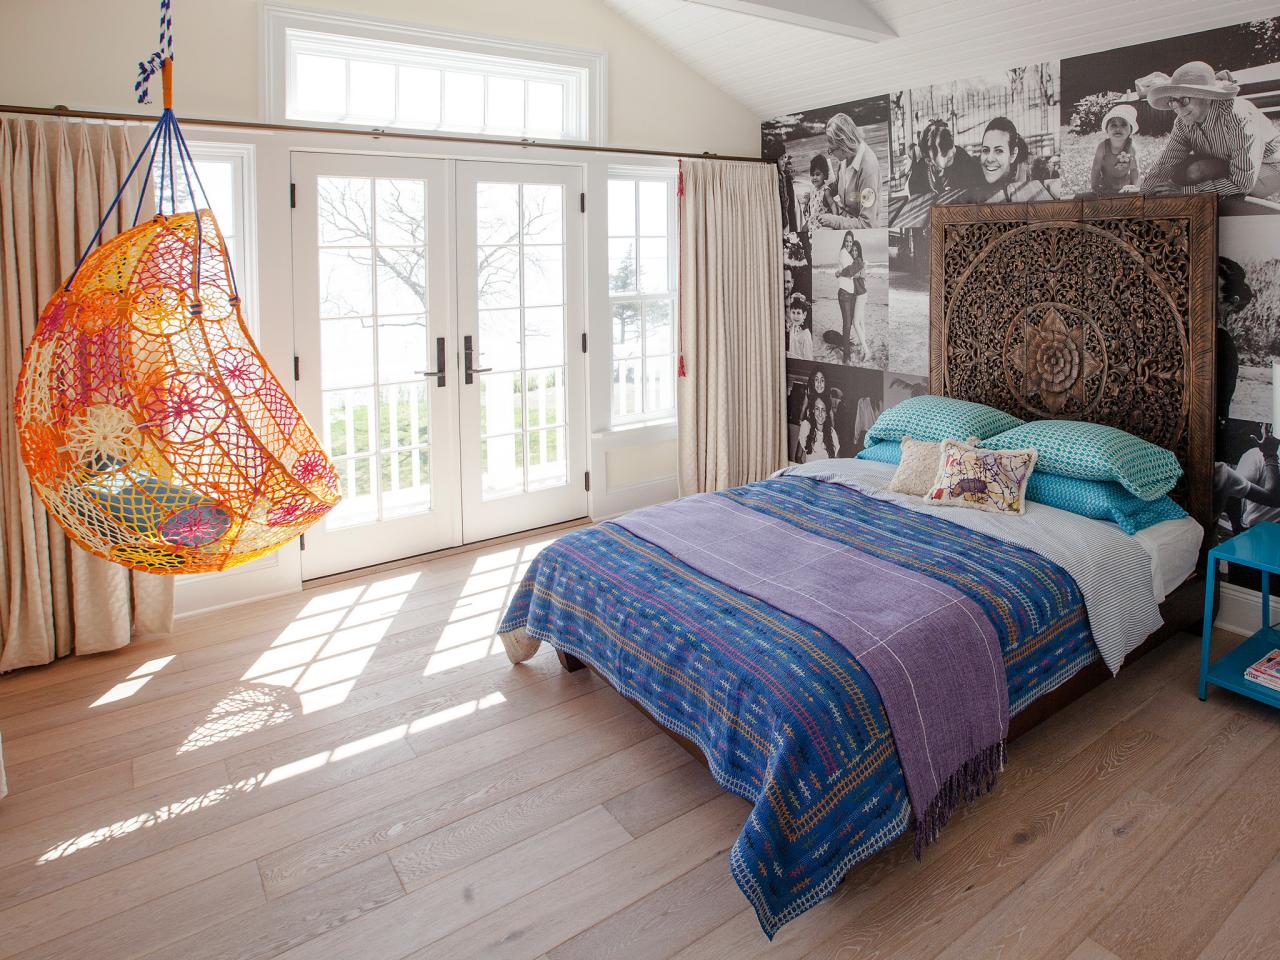 Wood Floors for Bedrooms: Pictures, Options & Ideas | HGTV